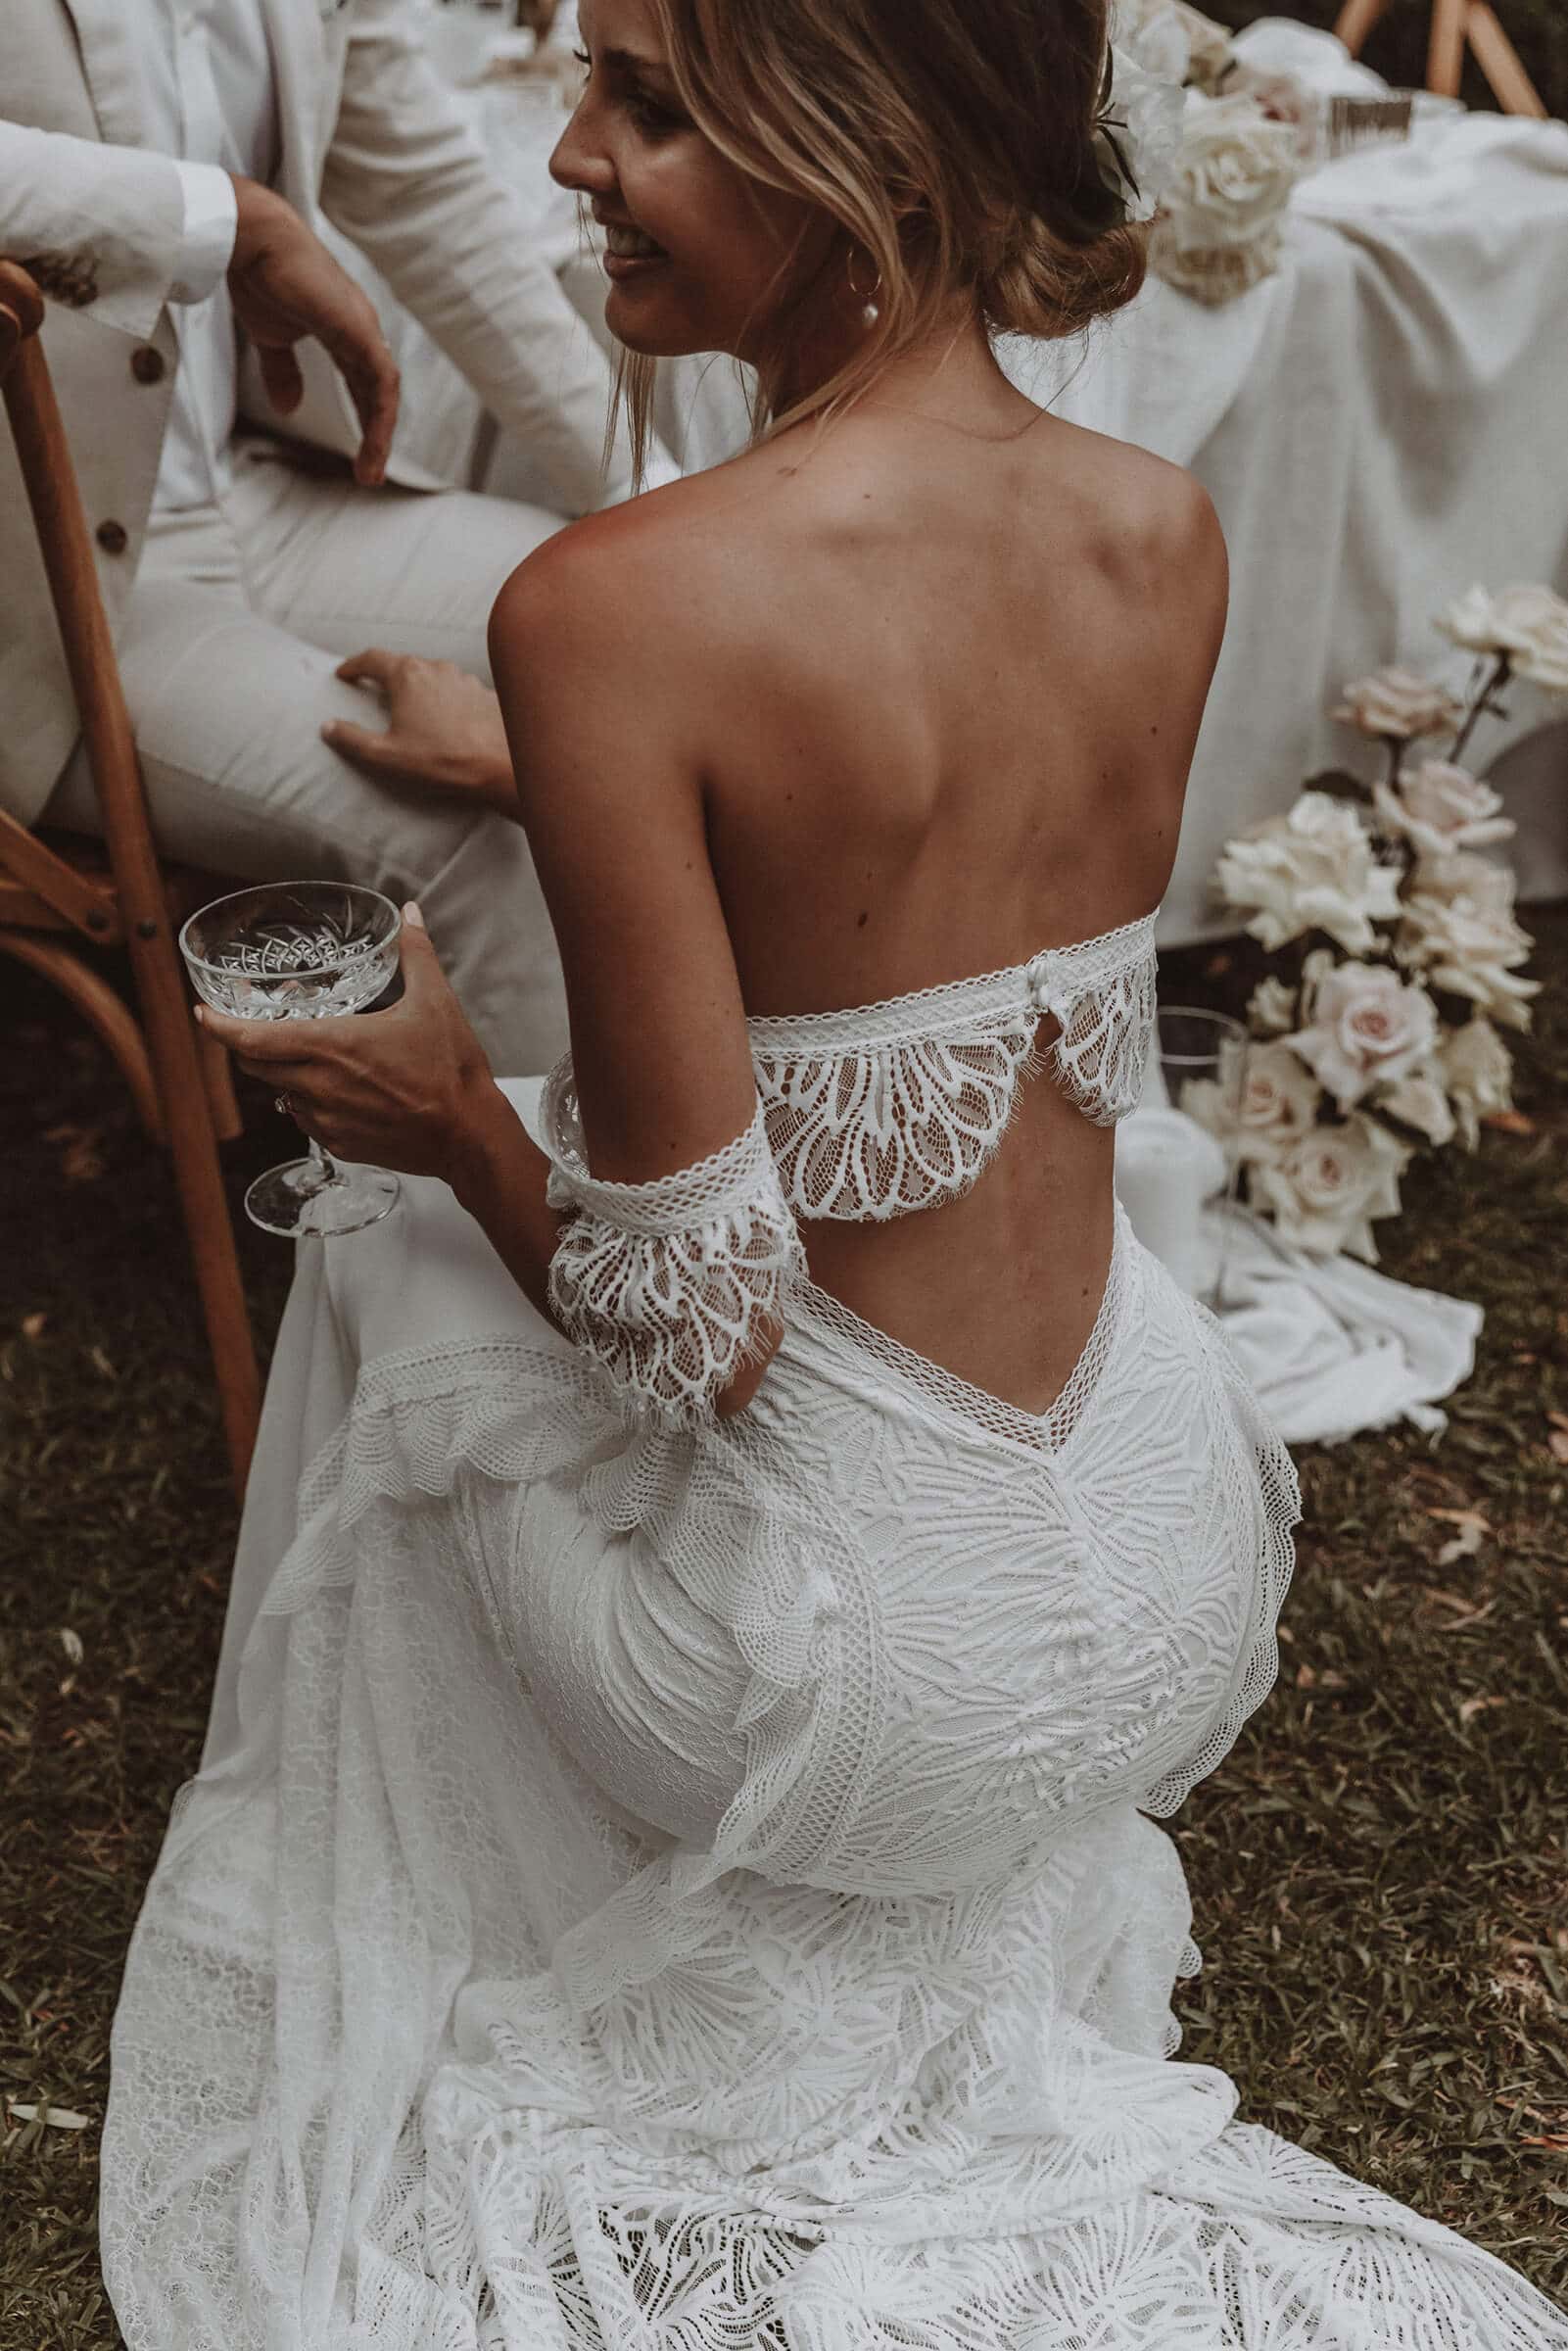 The Nora Dress  That Special Day Bridal Warehouse